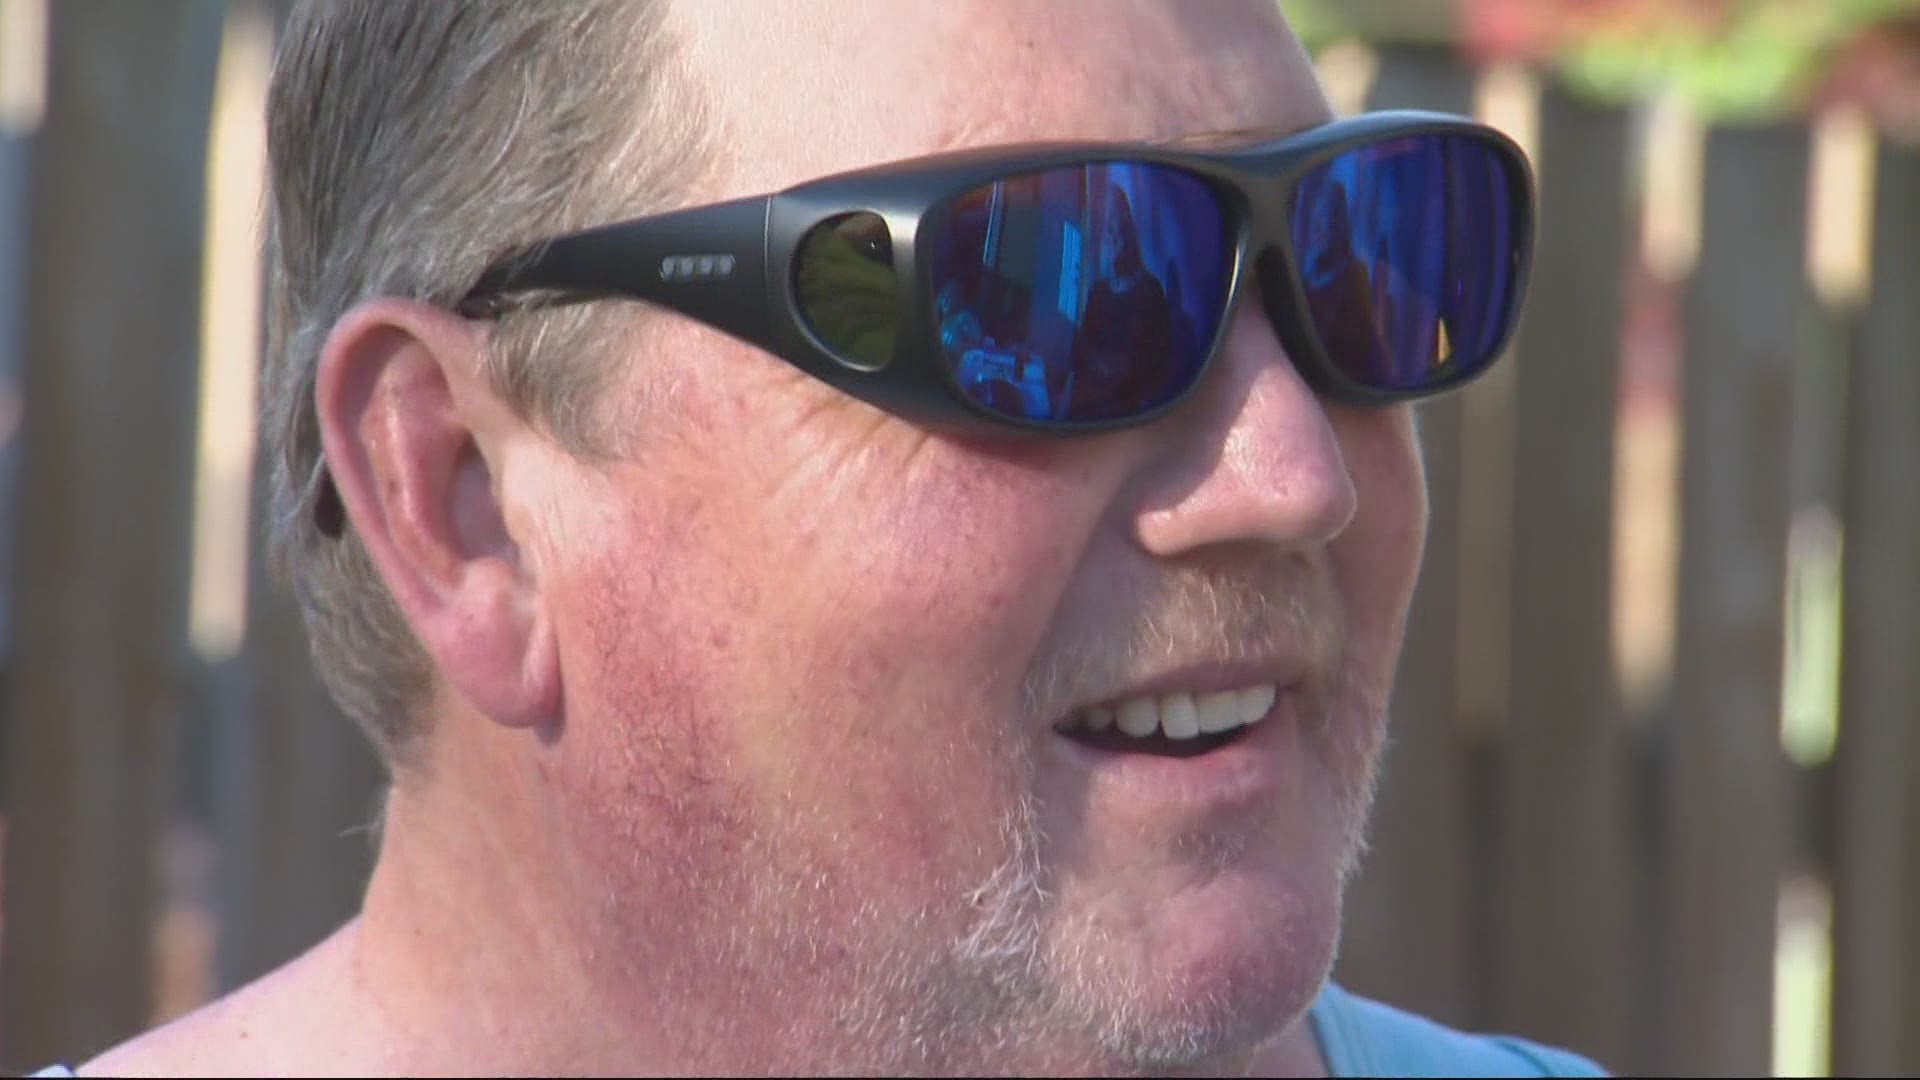 A Camas man got a special surprise from his family Friday. After years of not being able to see certain colors, they helped him overcome that obstacle.